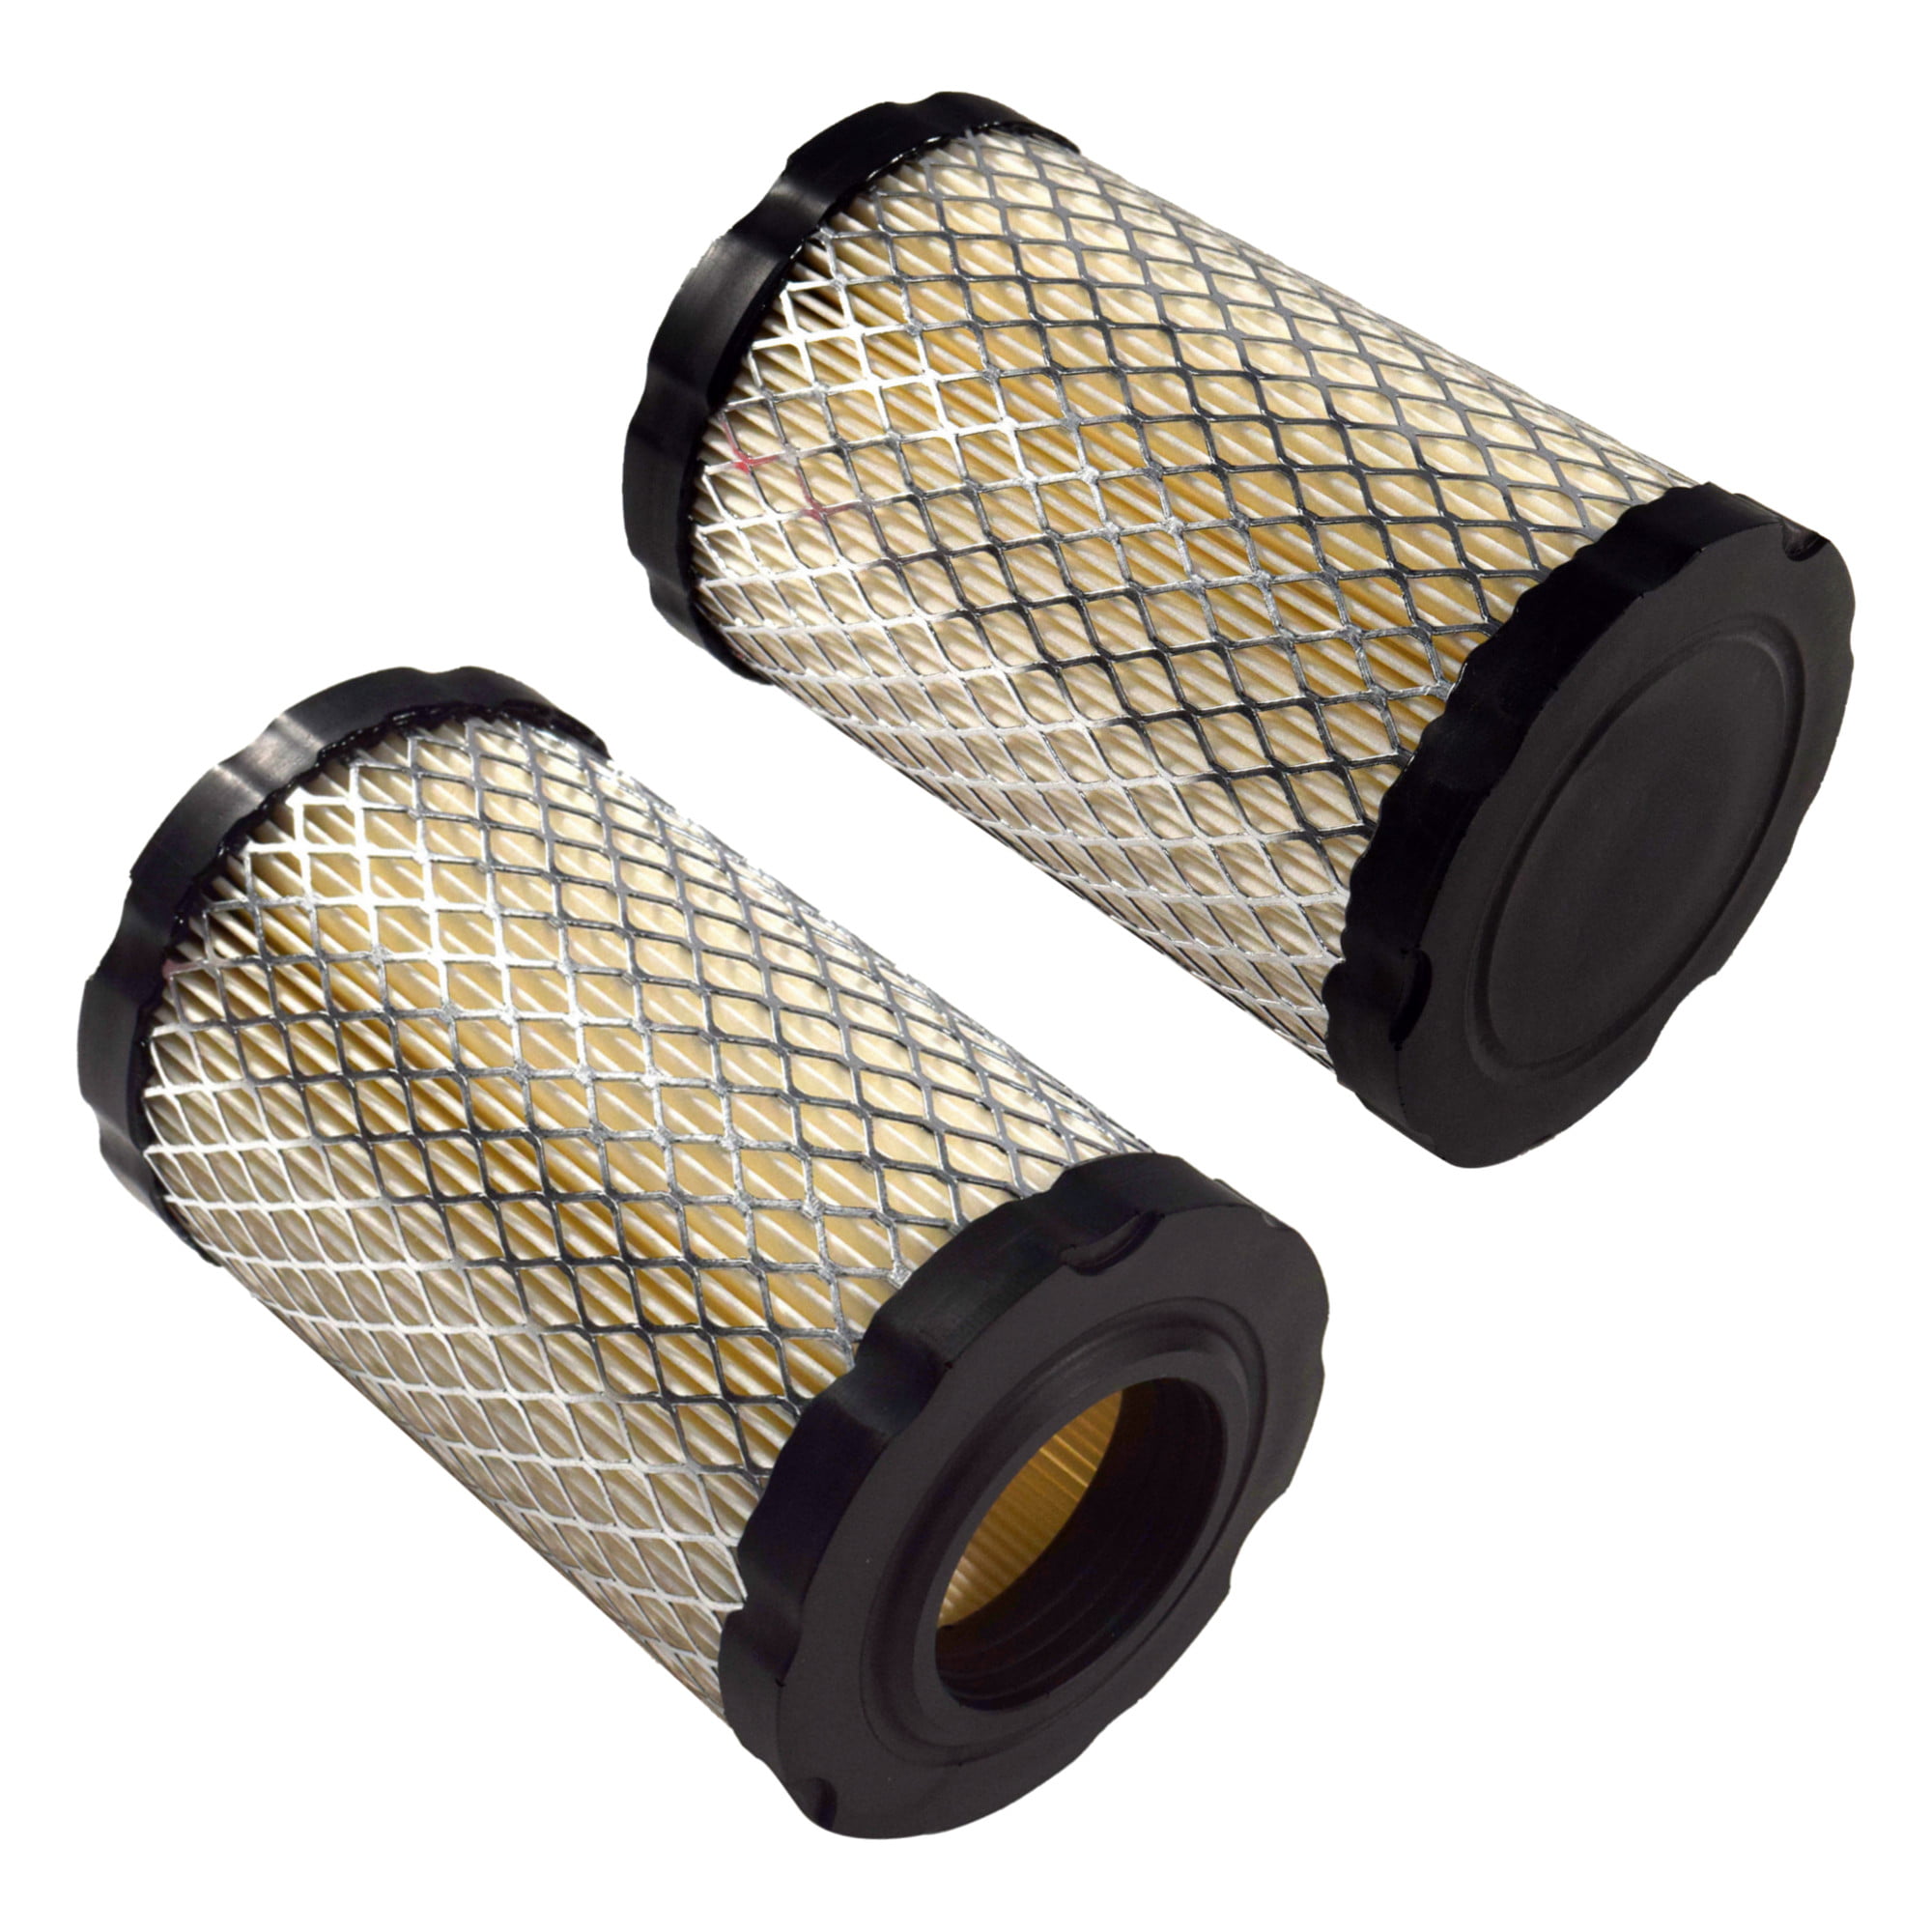 2-Pack HQRP Air Filter Kit for Craftsman GT5000 GT3000 DYS4500 YS4500 # 33926 